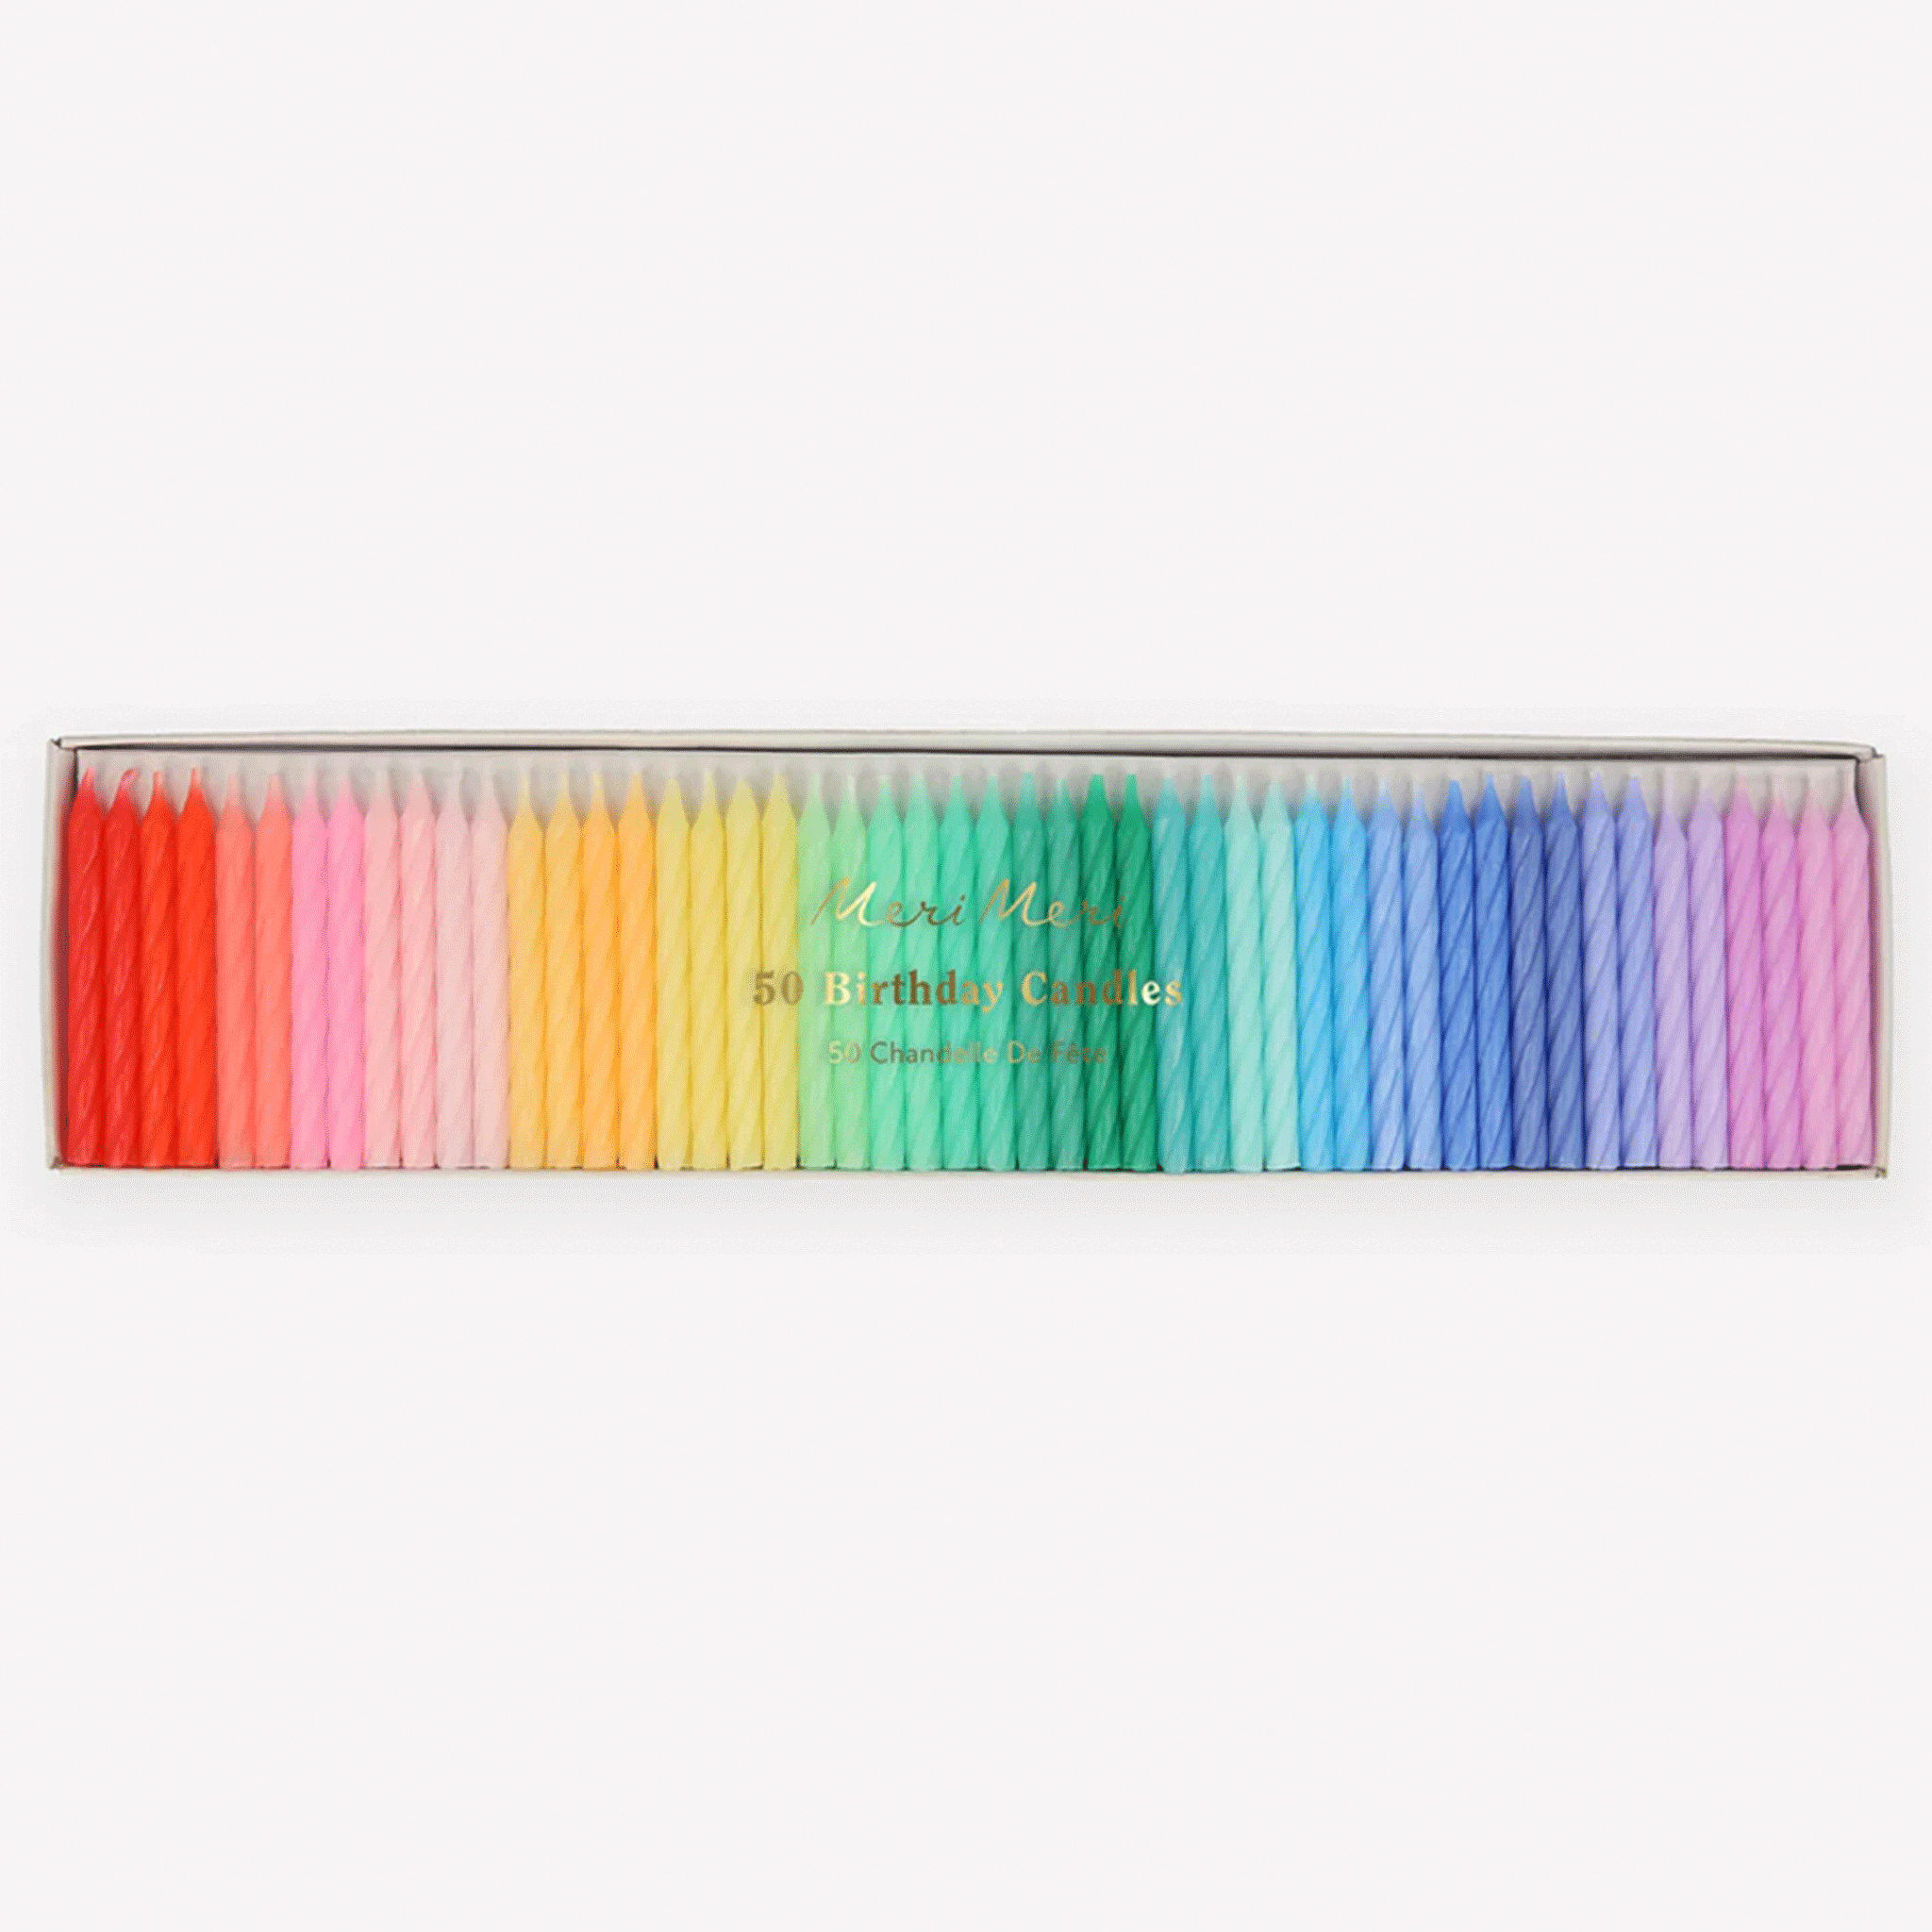 On a white background is a pack of 50 twisted candles in all the colors of the rainbow. 